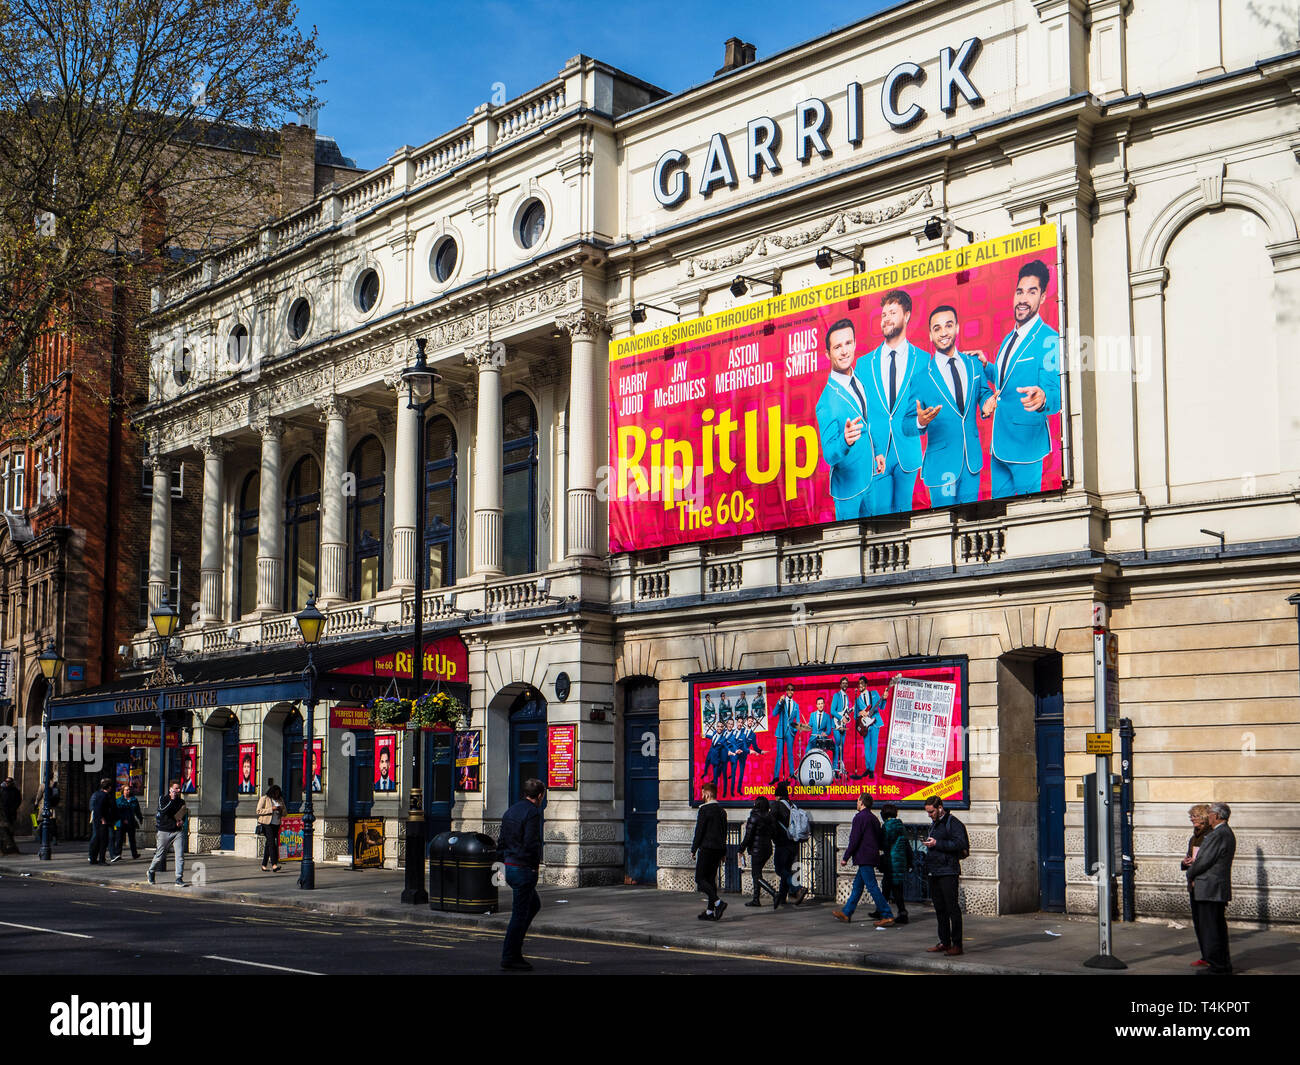 The Garrick Theatre in London's West End theatre district, opened in 1889 and named after the stage actor David Garrick. Grade II Listed. Stock Photo